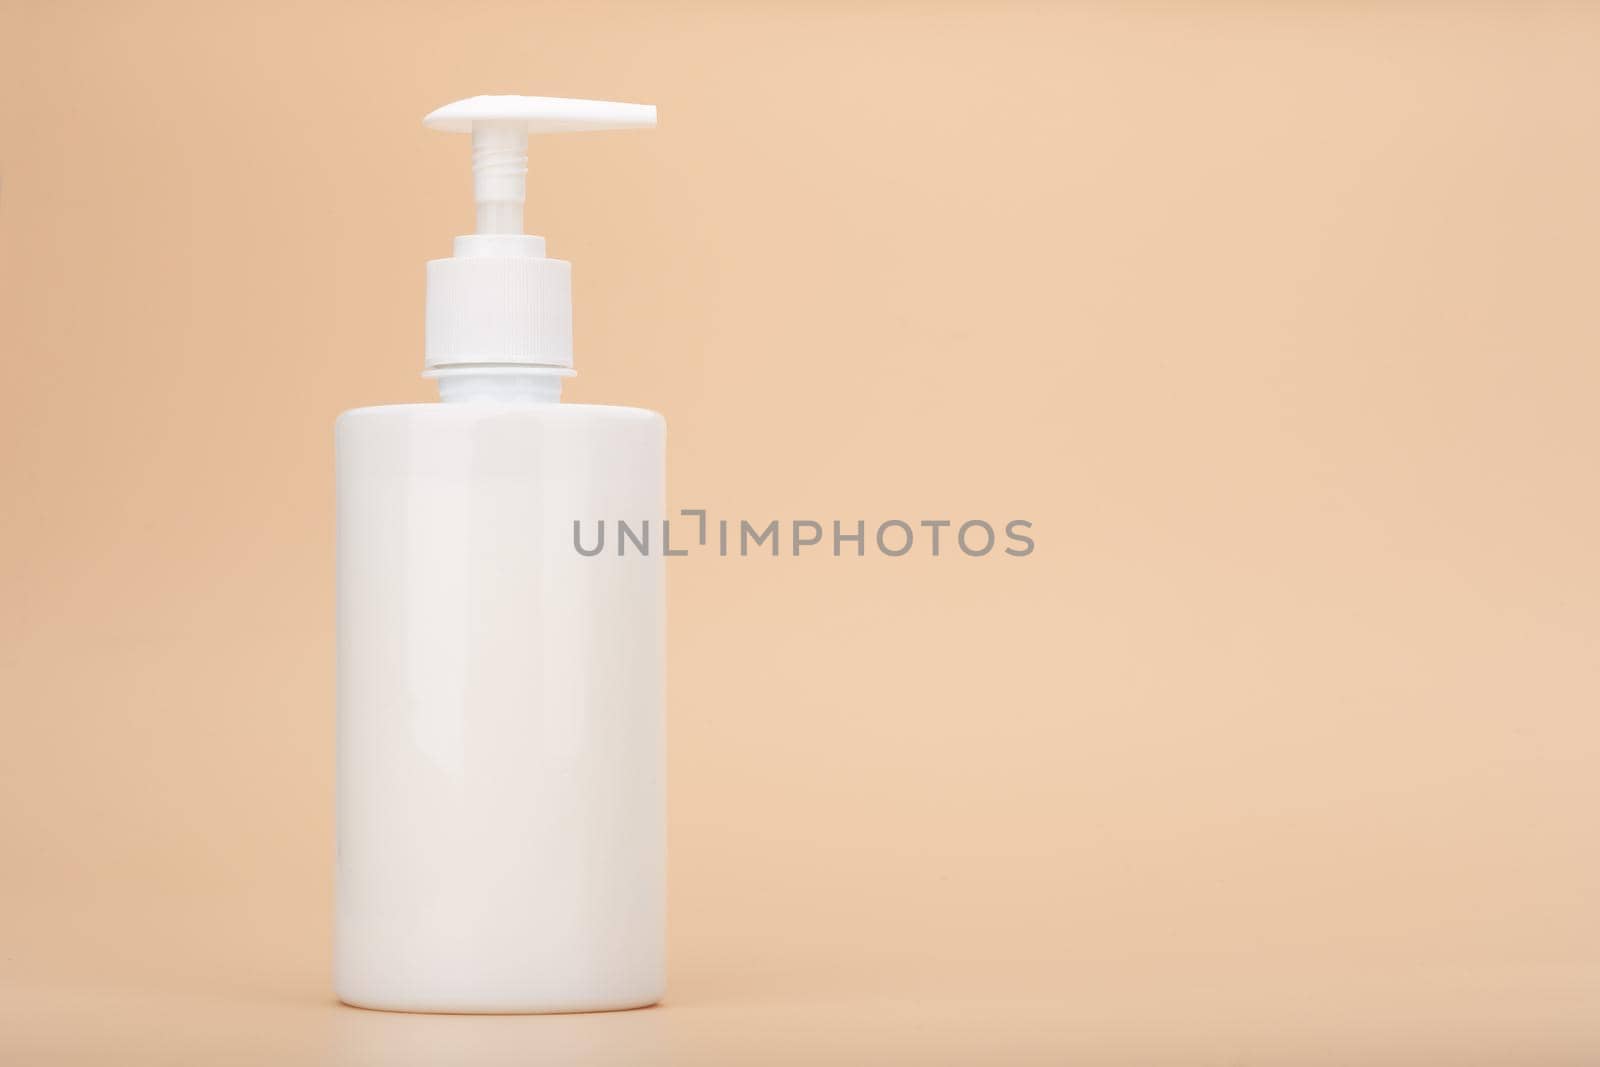 Shower gel, liquid soap or intimate gel in white unbranded tube against light beige background with copy space. Concept of intimate hygiene or gel for sensitive skin